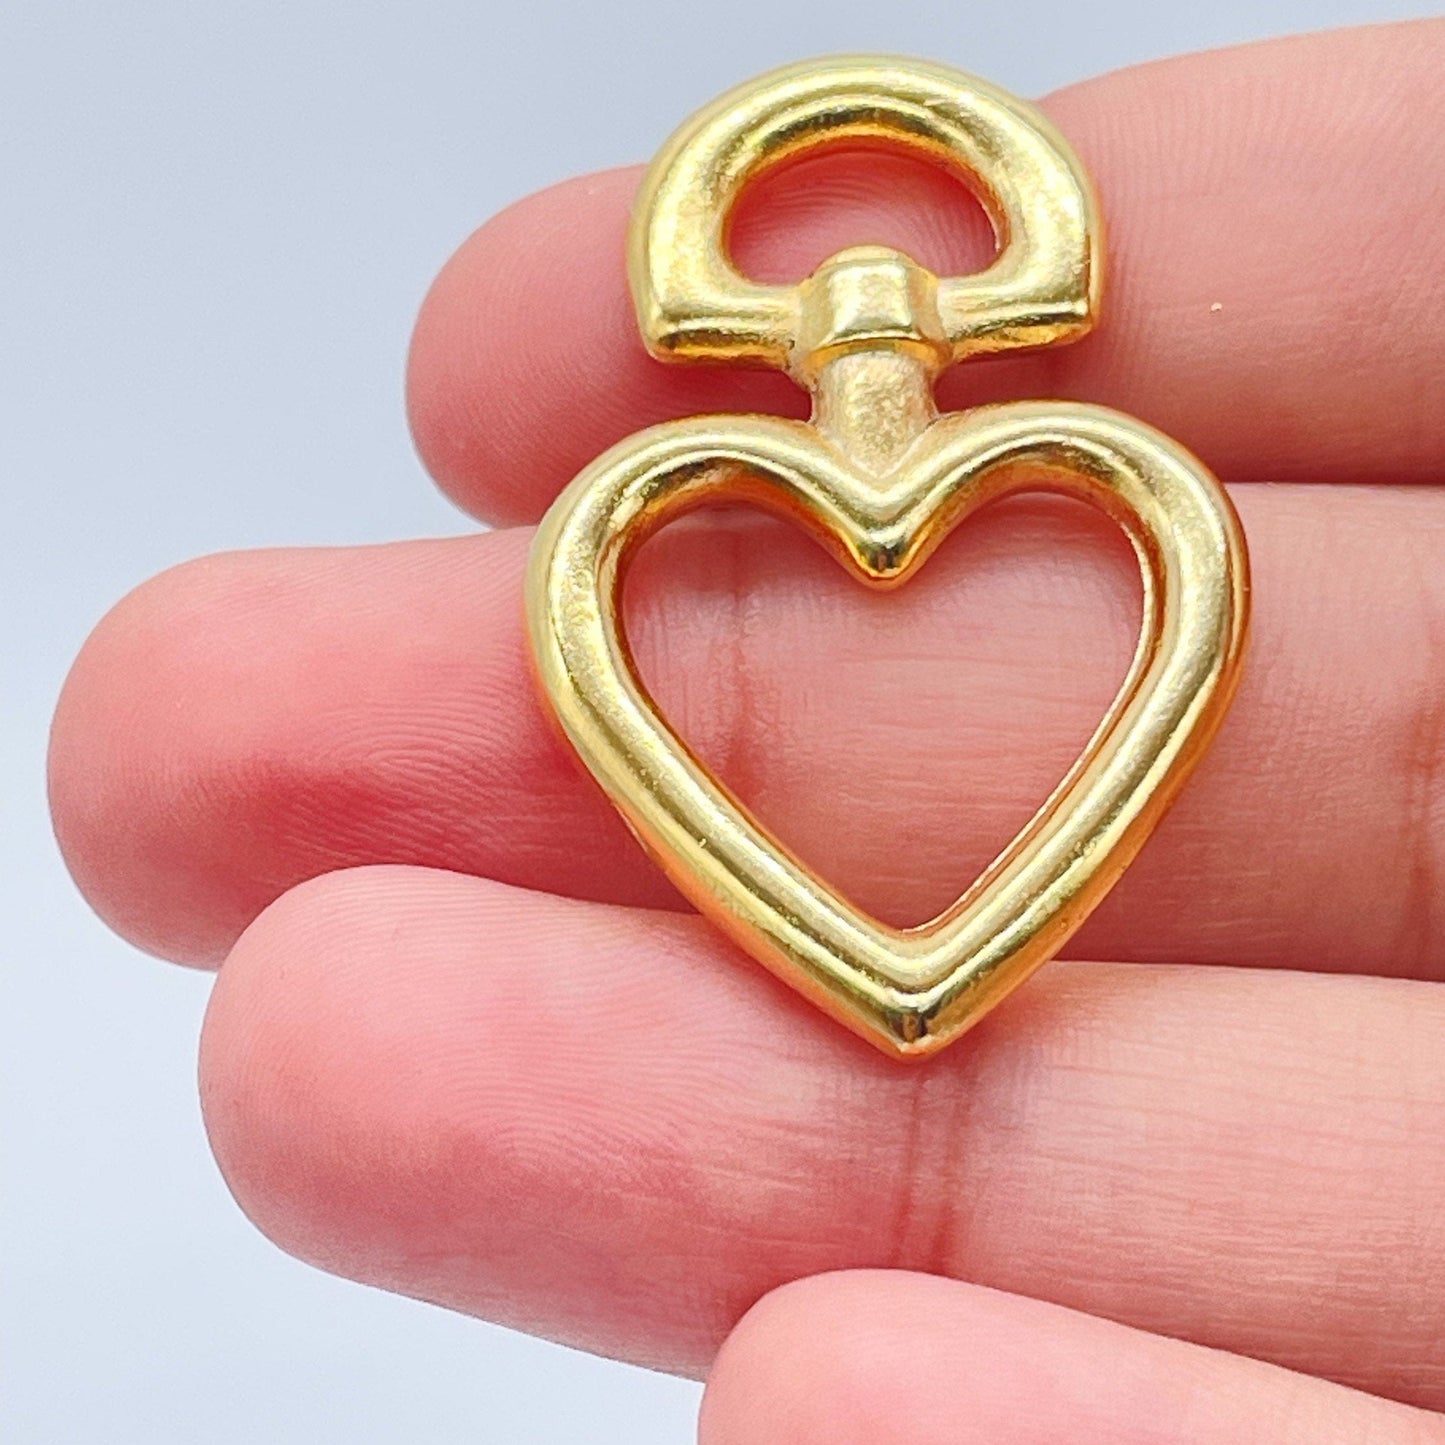 18k Gold Layered Heart Jewelry Connector For Creative Styling And Creation For